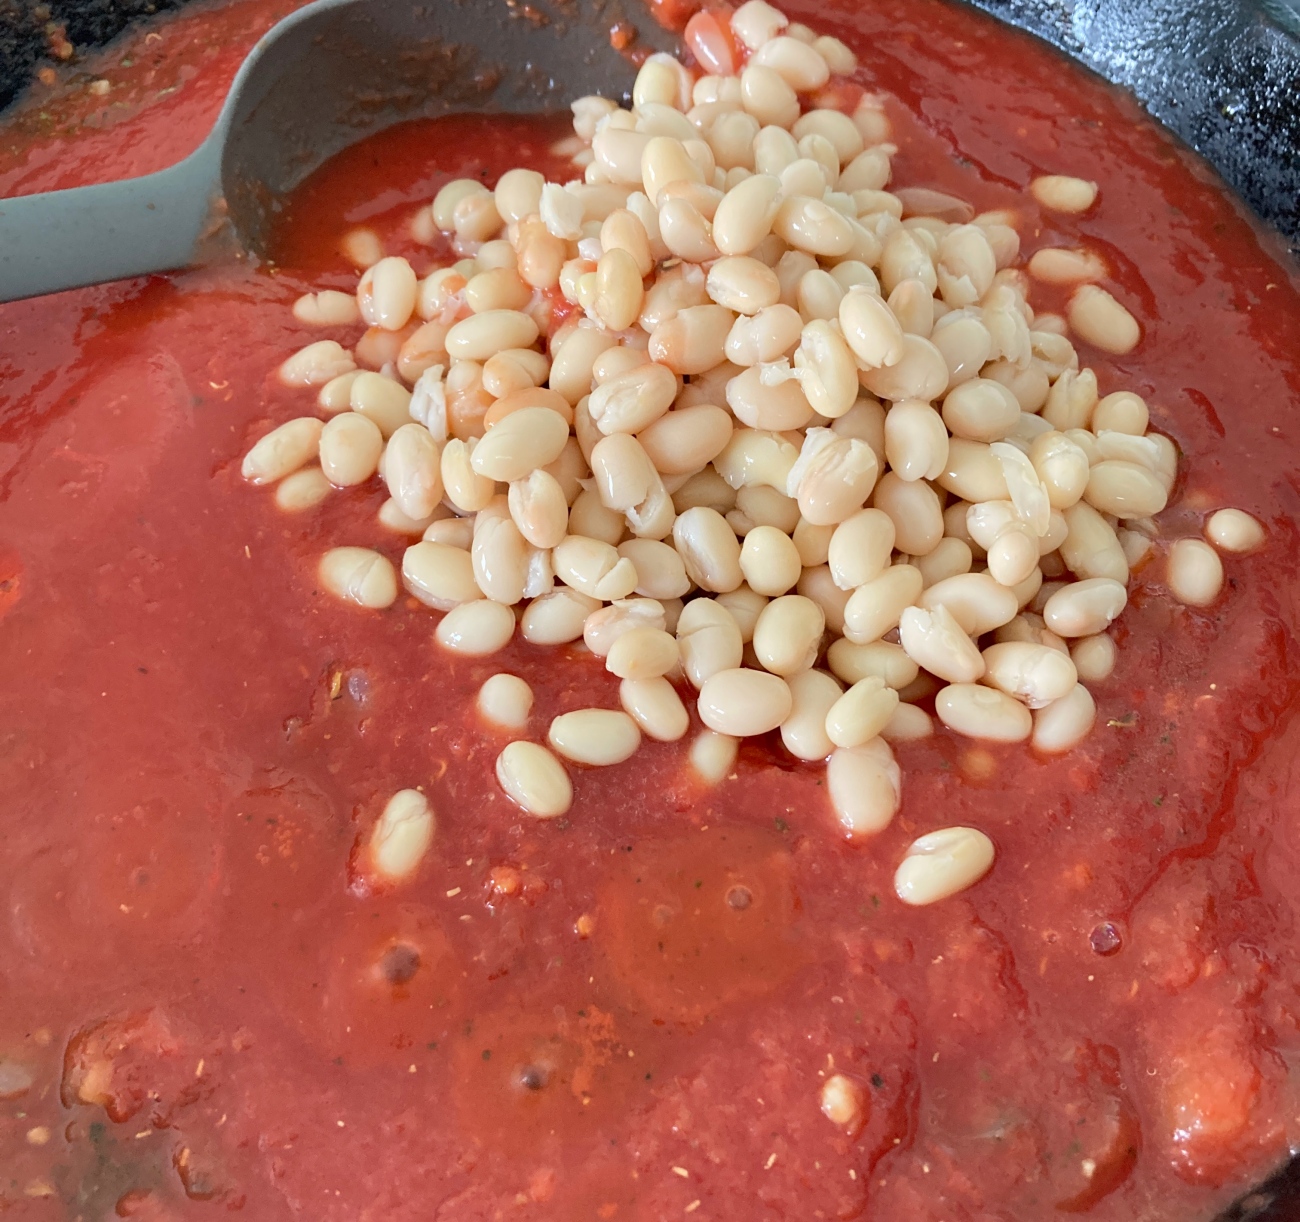 Heat 2 tablespoons olive oil in large skillet over medium and add onion, Italian seasoning, oregano, and 1/2 teaspoon salt. Cook for 7 minutes then add garlic, tomatoes, remaining salt, beans, and broth. Simmer for 10-15 minutes.